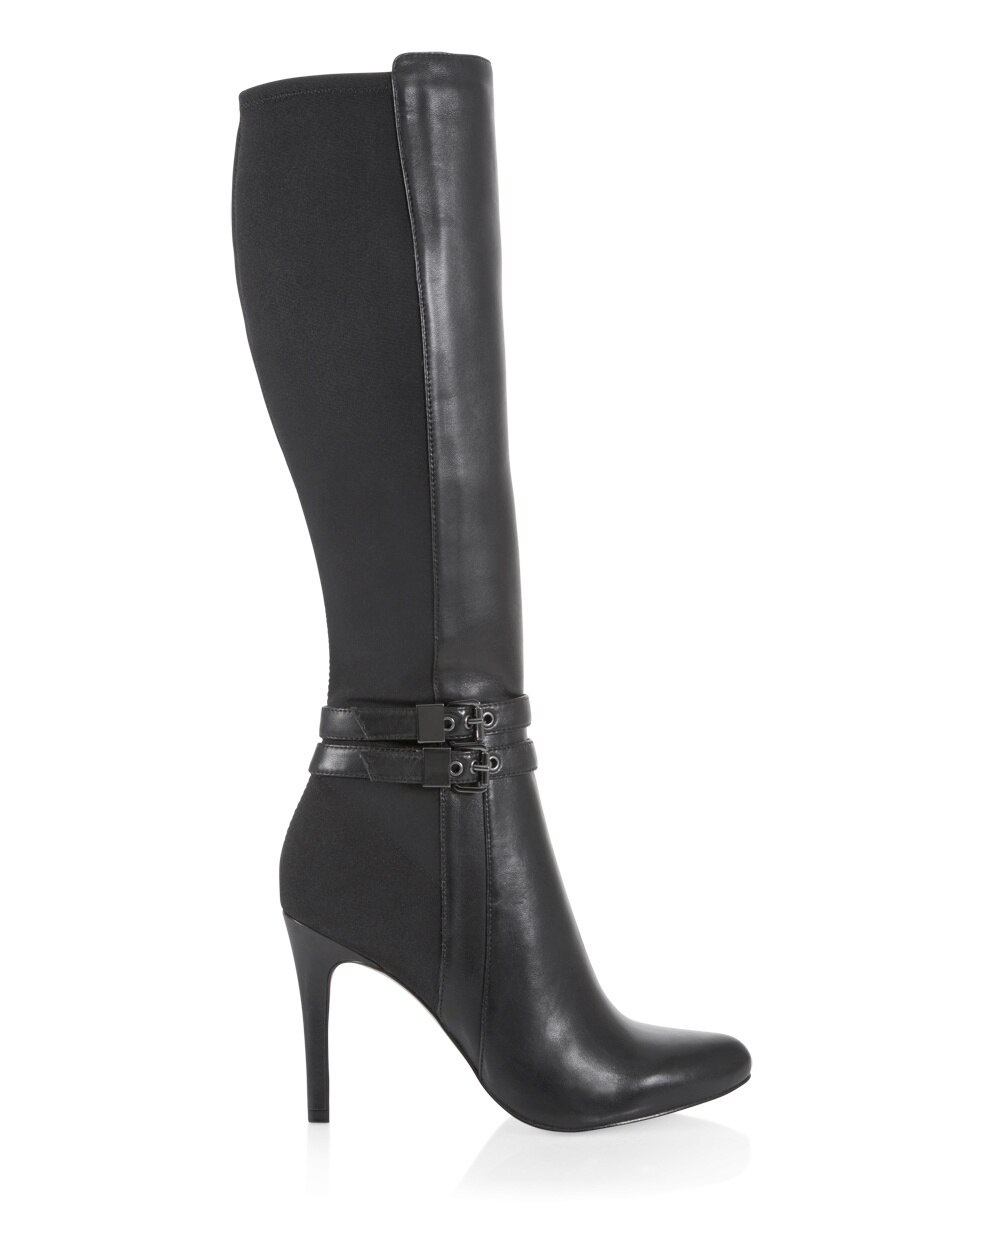 Tall Buckled Boots - Shop Shoes for Women - Black and White Shoes ...